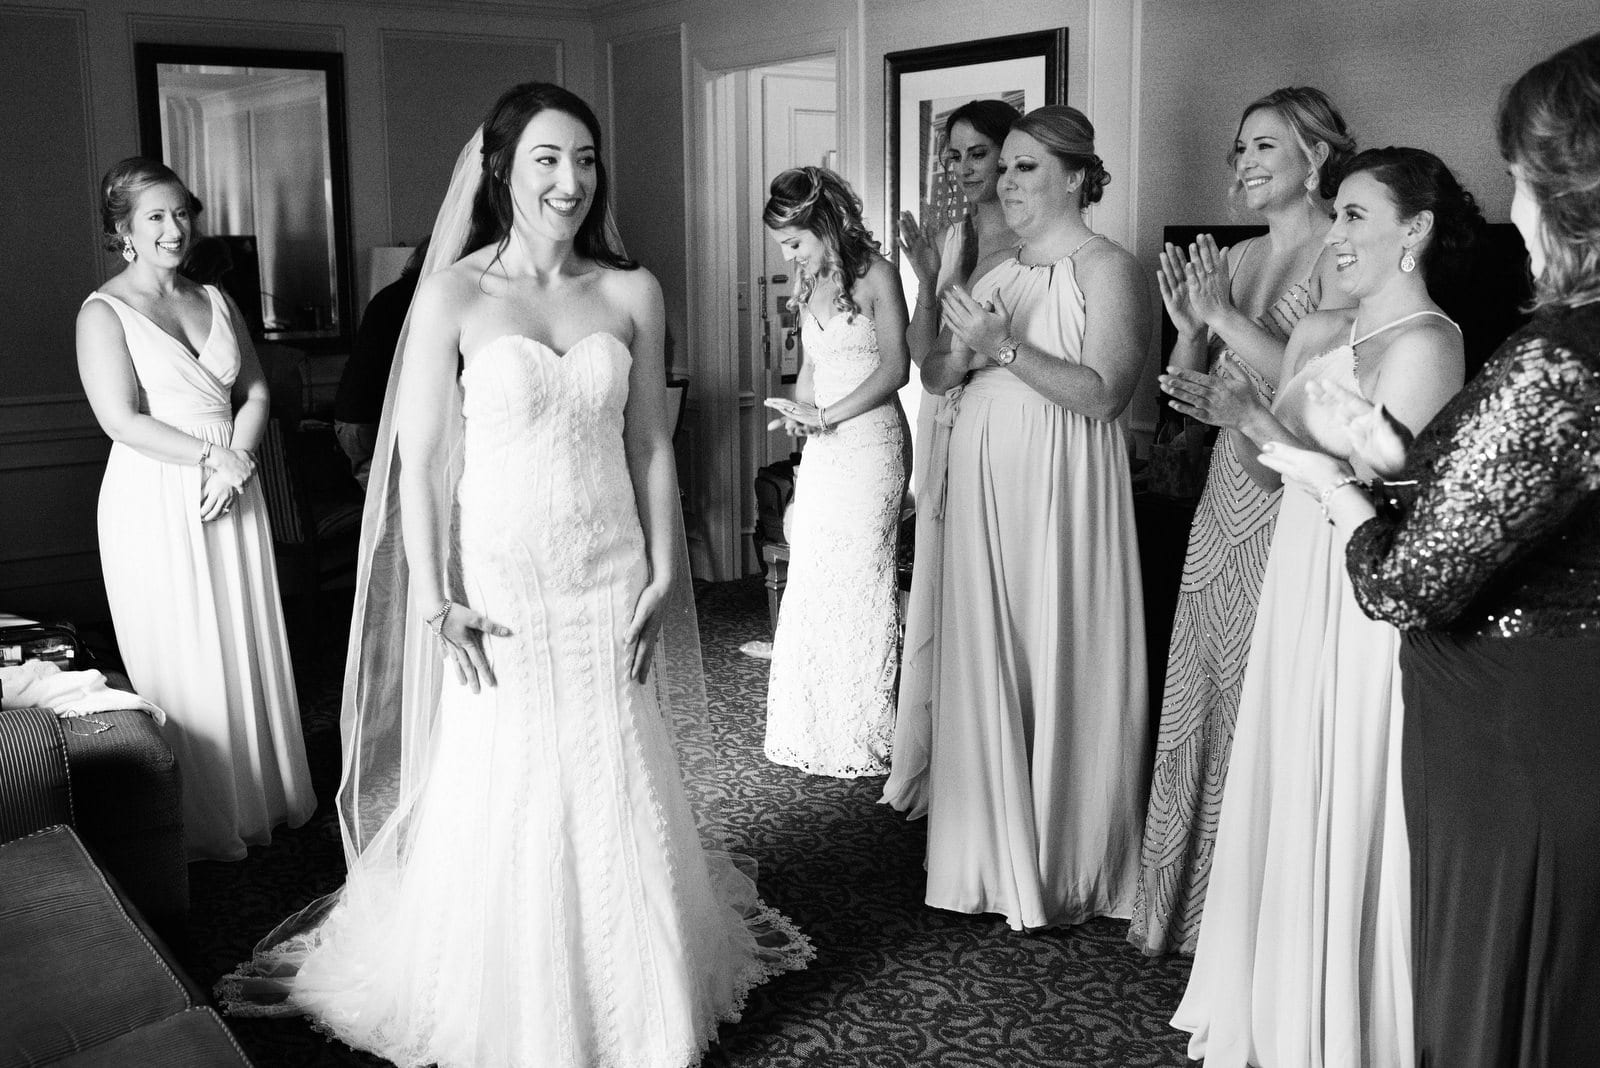 A smiling bride stands in front of her bridesmaids as they applaud in a room at the Omni William Penn Hotel.